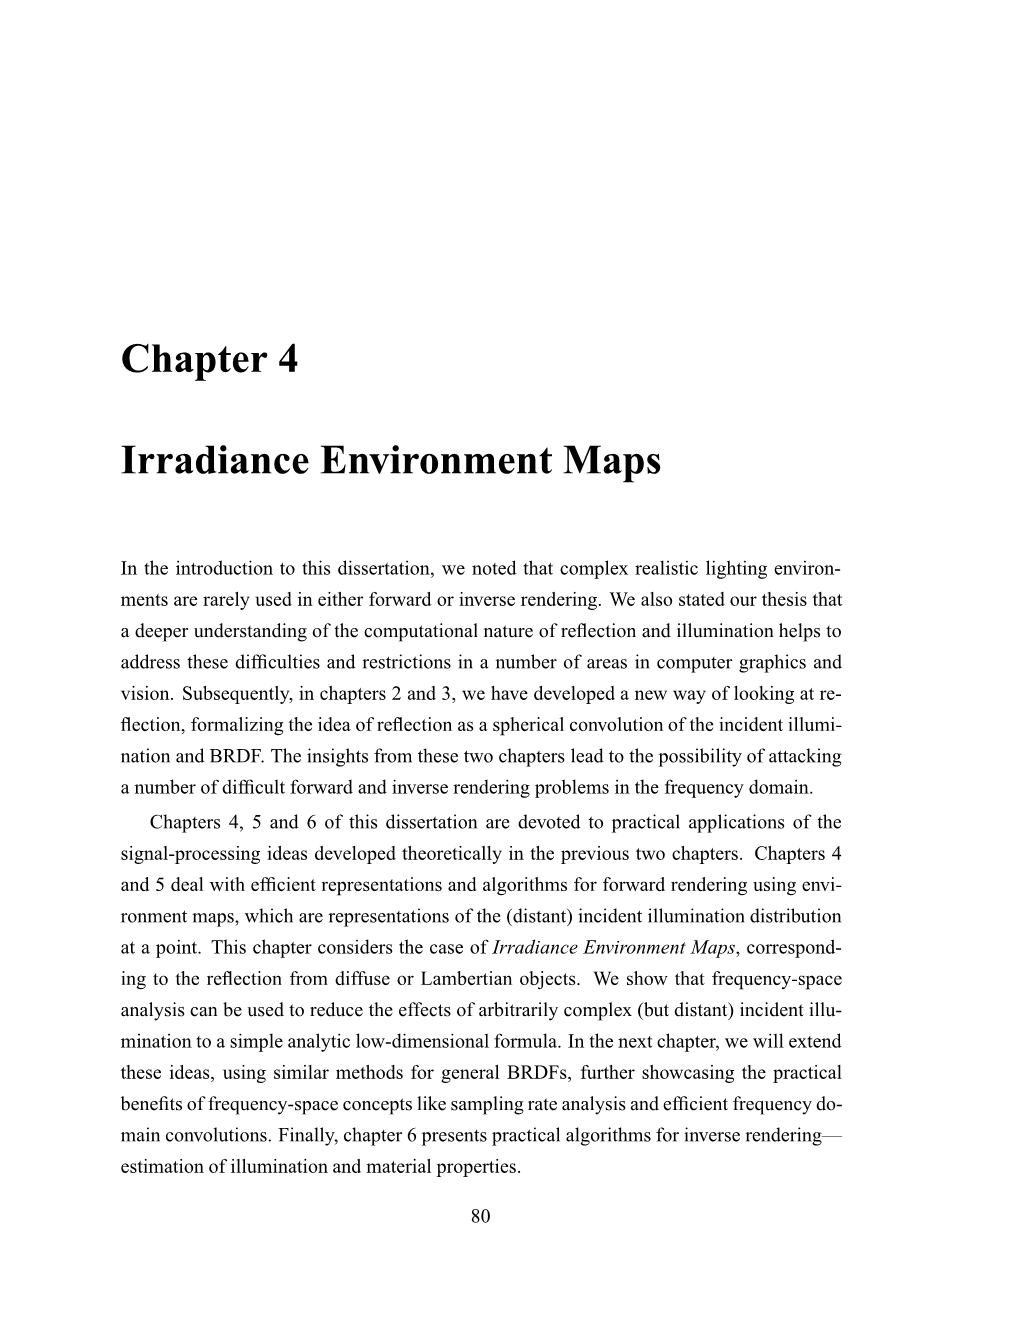 Chapter 4 Irradiance Environment Maps